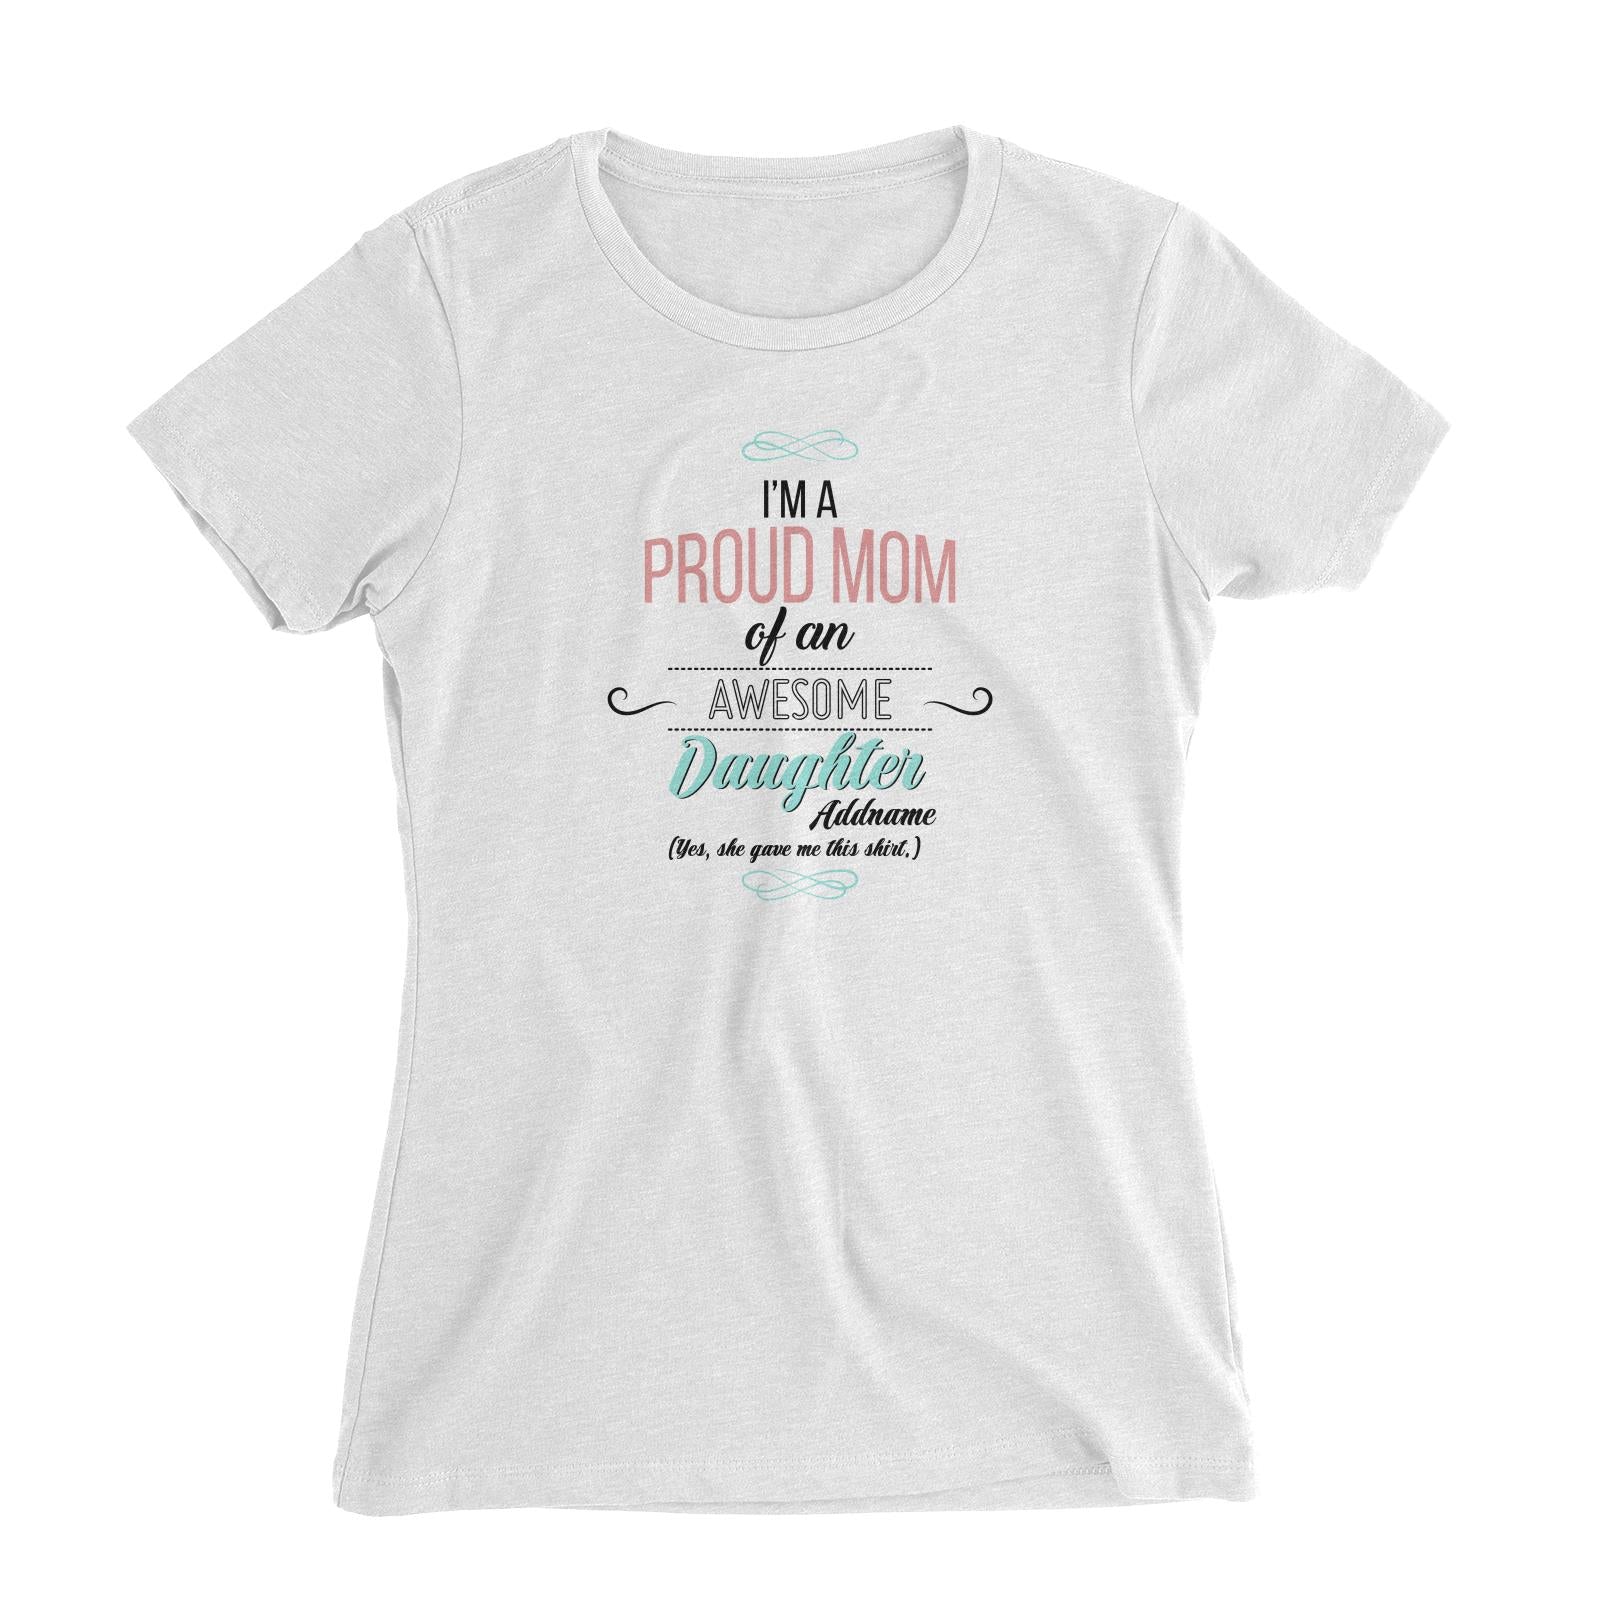 I'm A Proud Mom Of An Awesome Daughter Personalizable with Name Women's Slim Fit T-Shirt